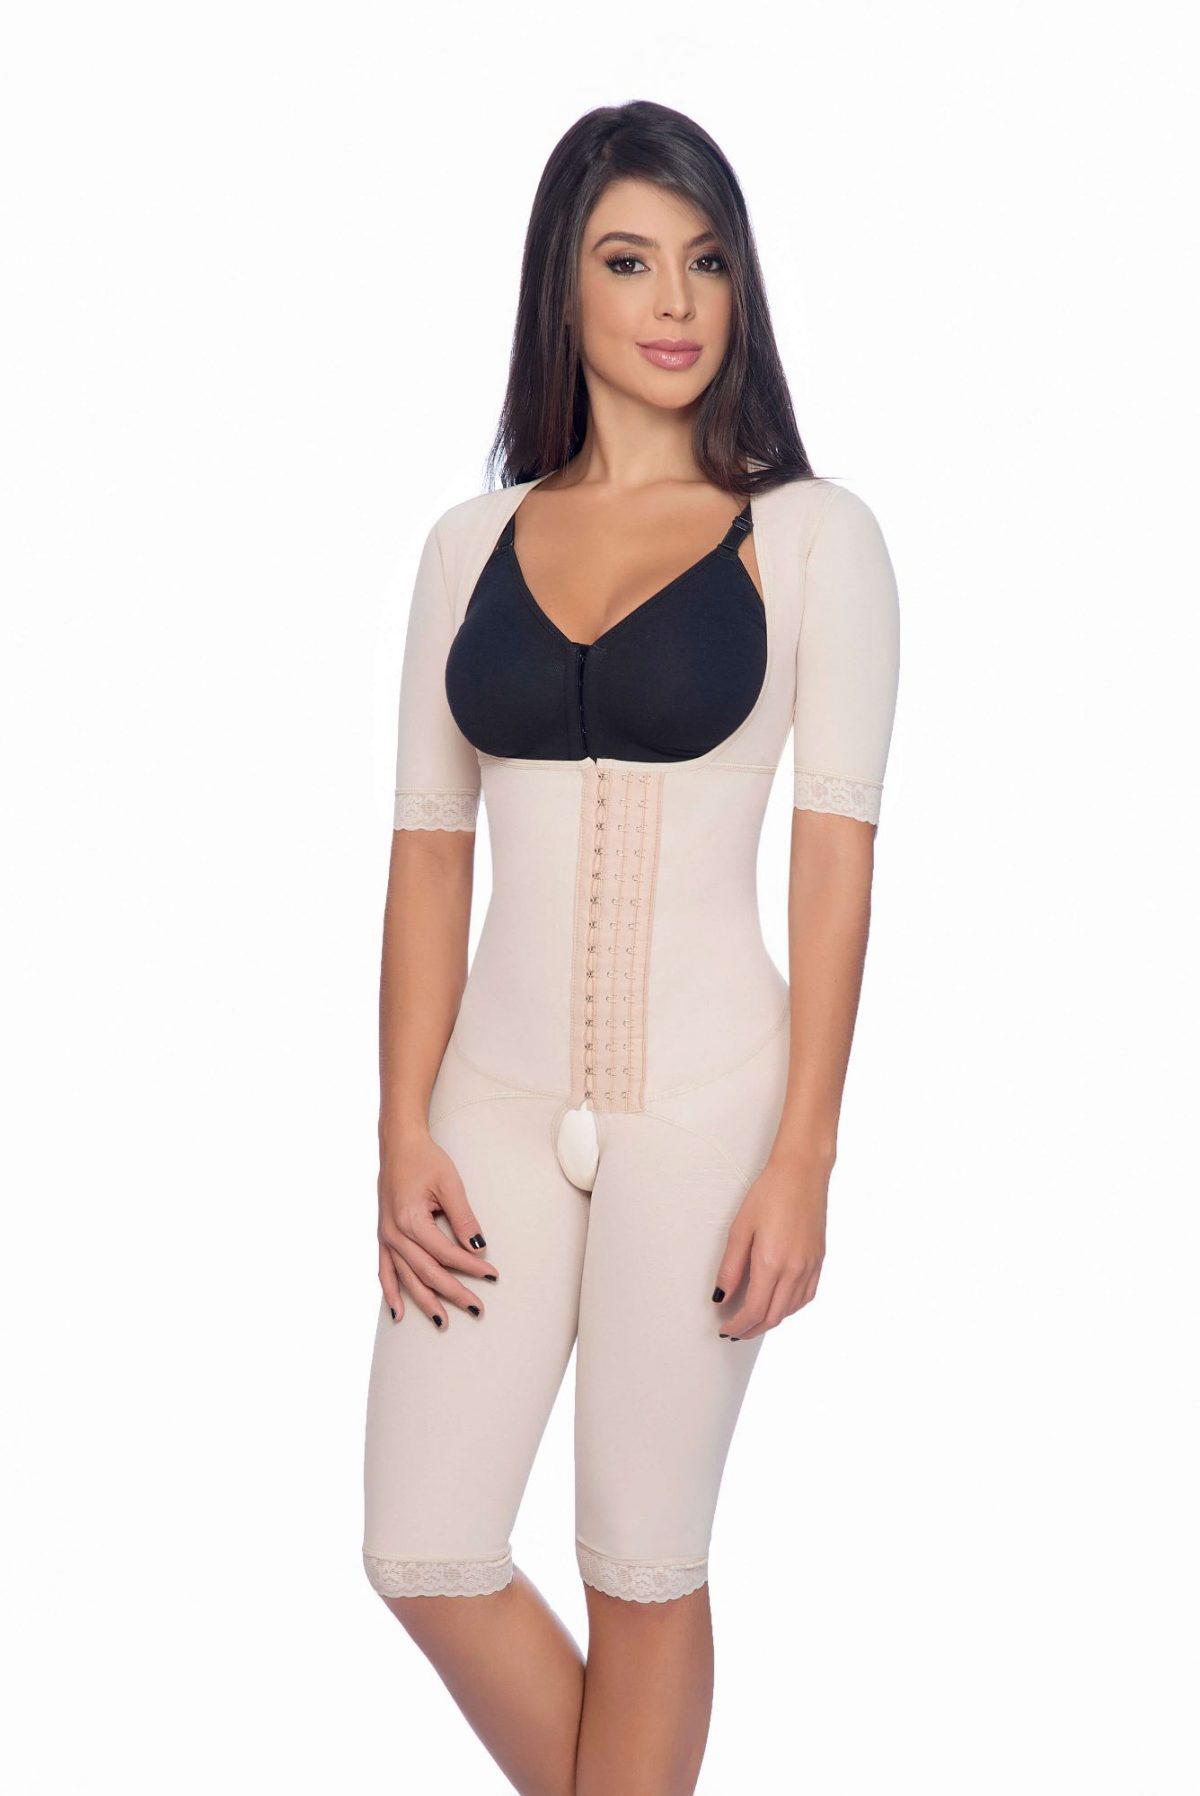 BRALESS FULL BODY ABOVE THE KNEE FAJA WITH SLEEVES AND HOOK CLOSURE -  LekkiHill